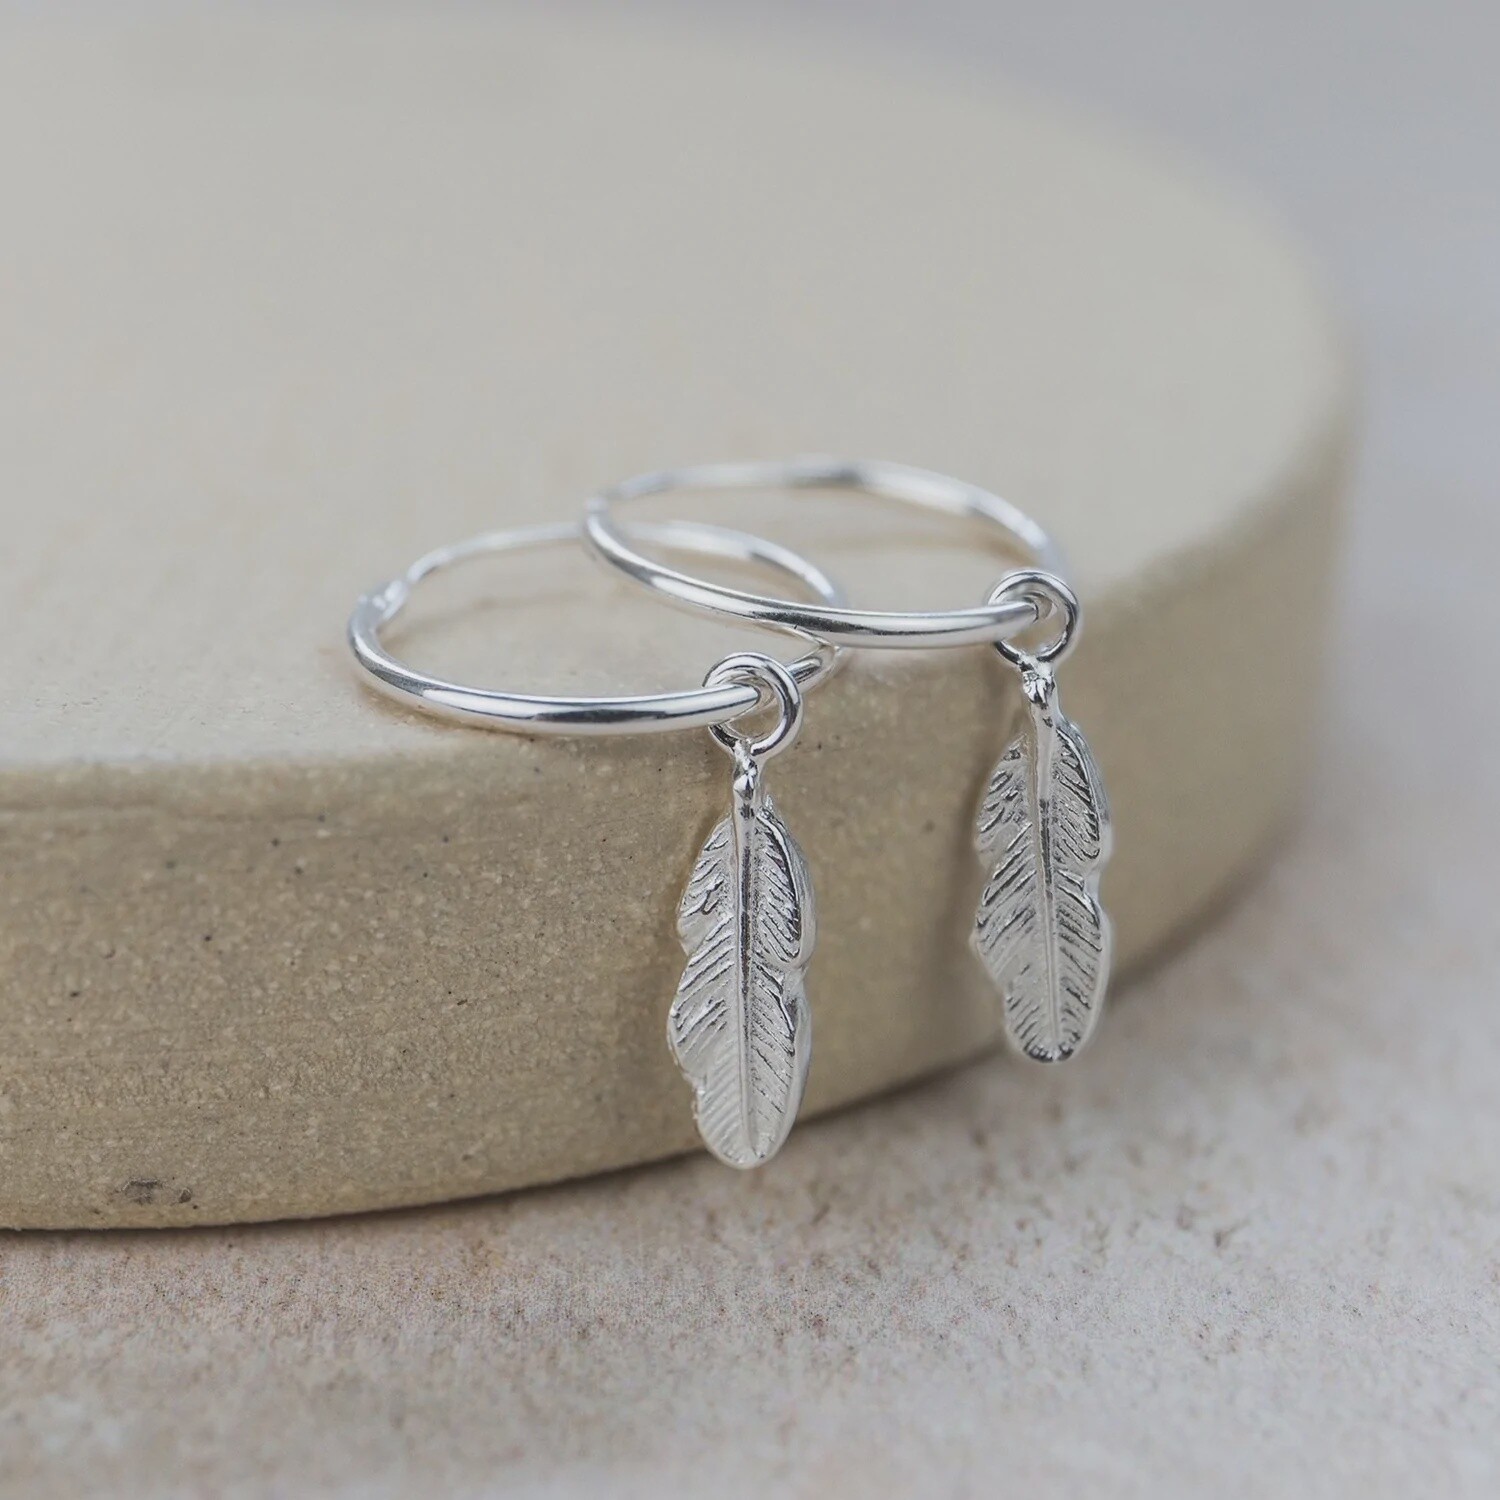 Feather hoops